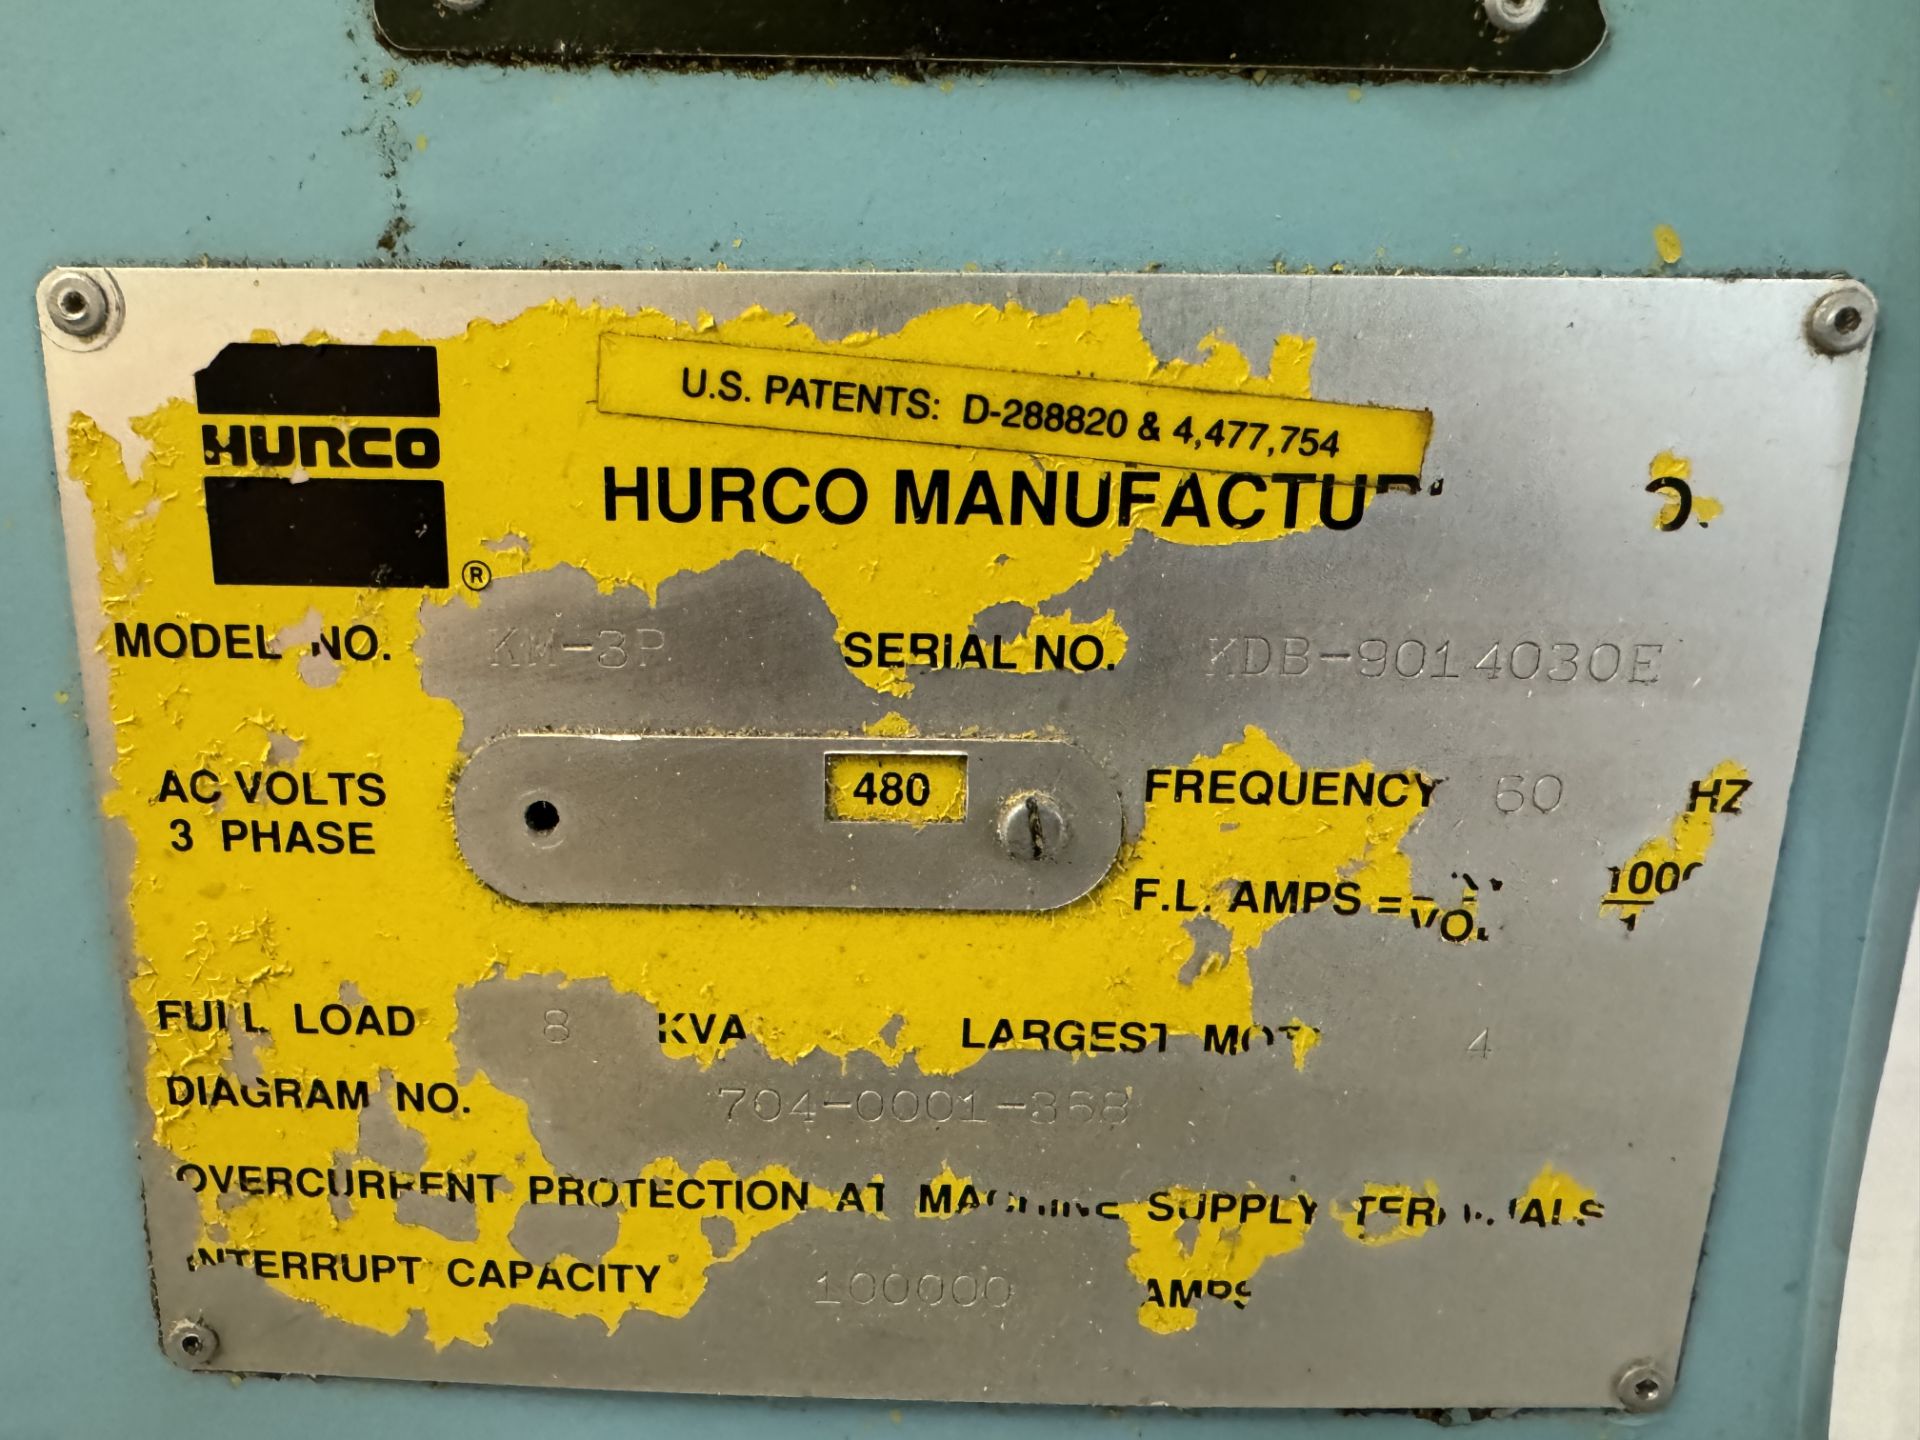 HURCO KM-3 3-AXIS CNC KNEE MILL WITH HURCO ULTIMAX KM-3P CONTROL INCLUDES TOOLING AND KURT VISE - Image 9 of 9